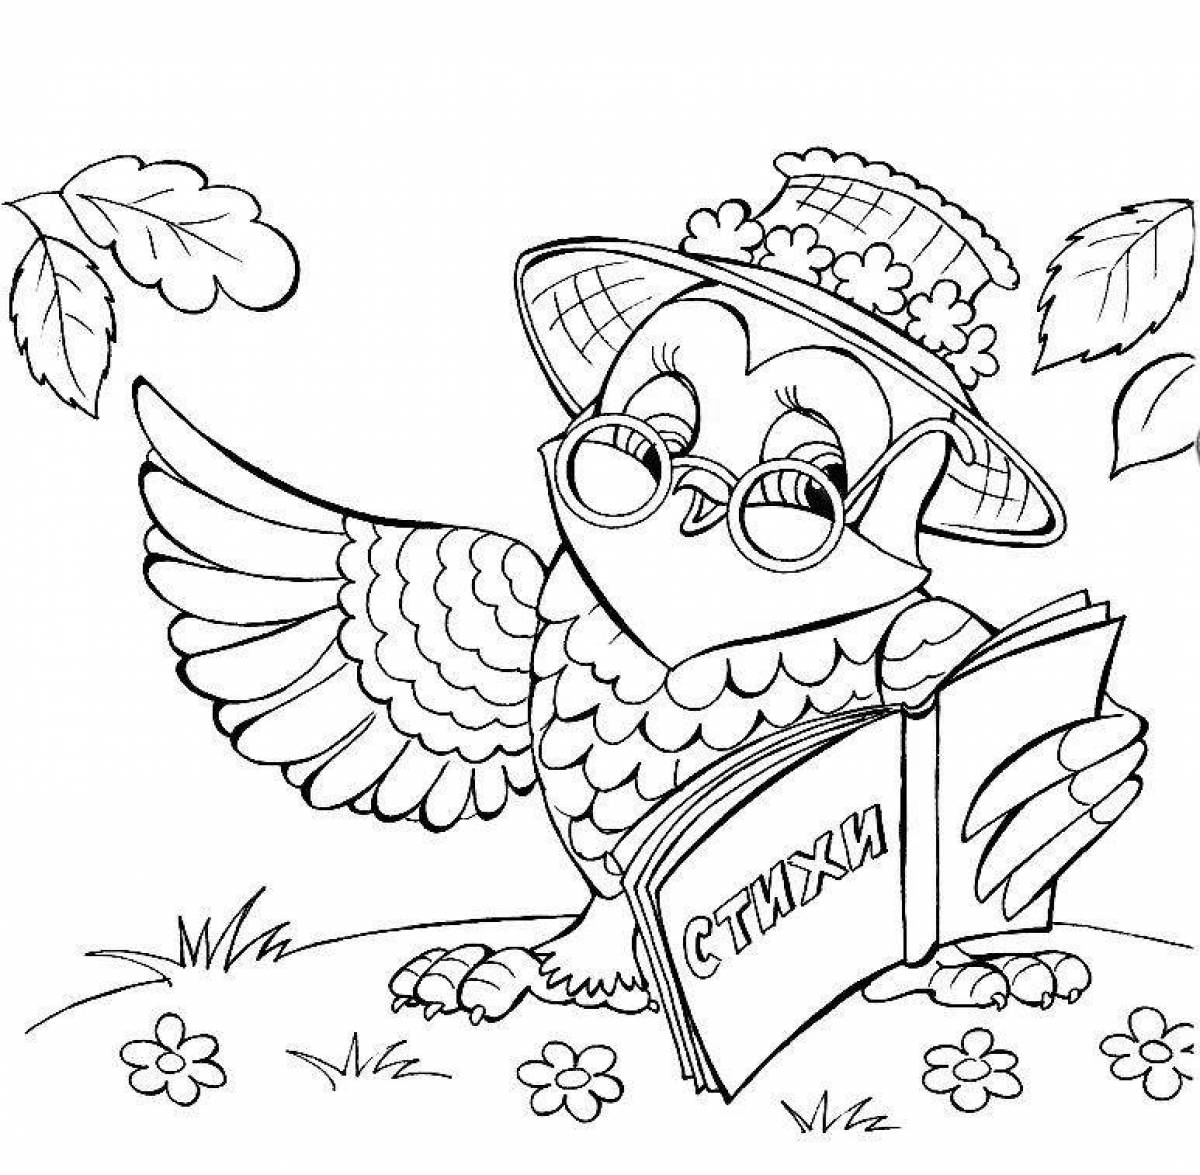 Glowing owlet coloring page